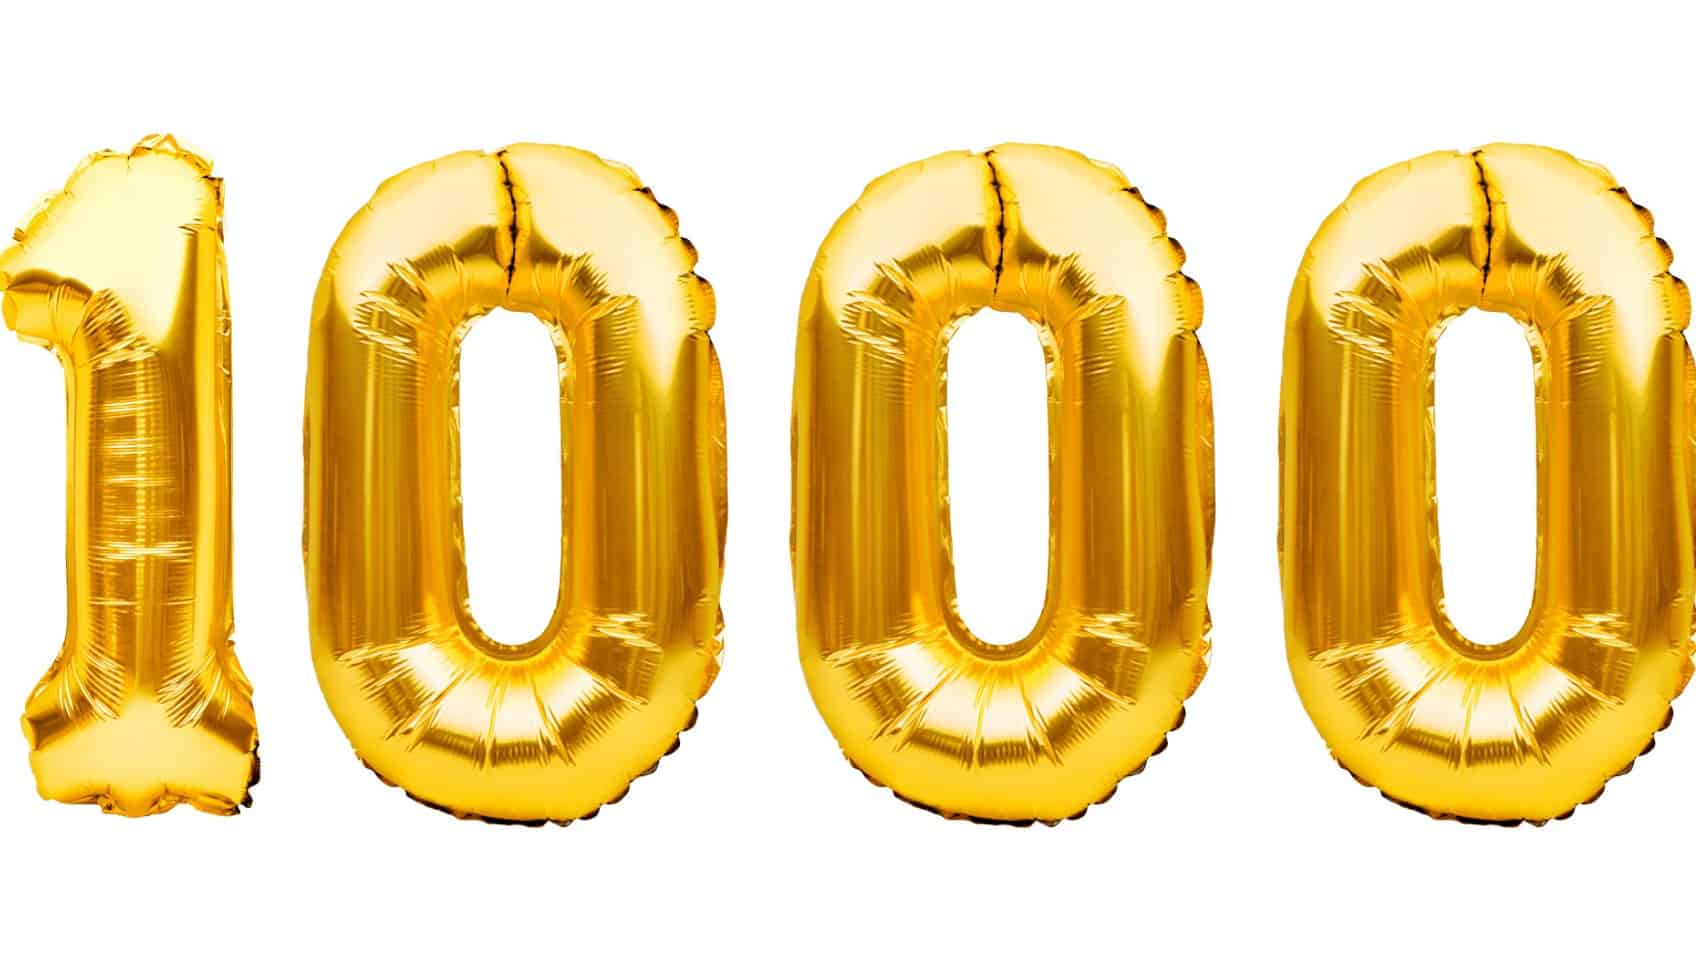 success of nearmap share price represented by gold baloons spelling out one thousand